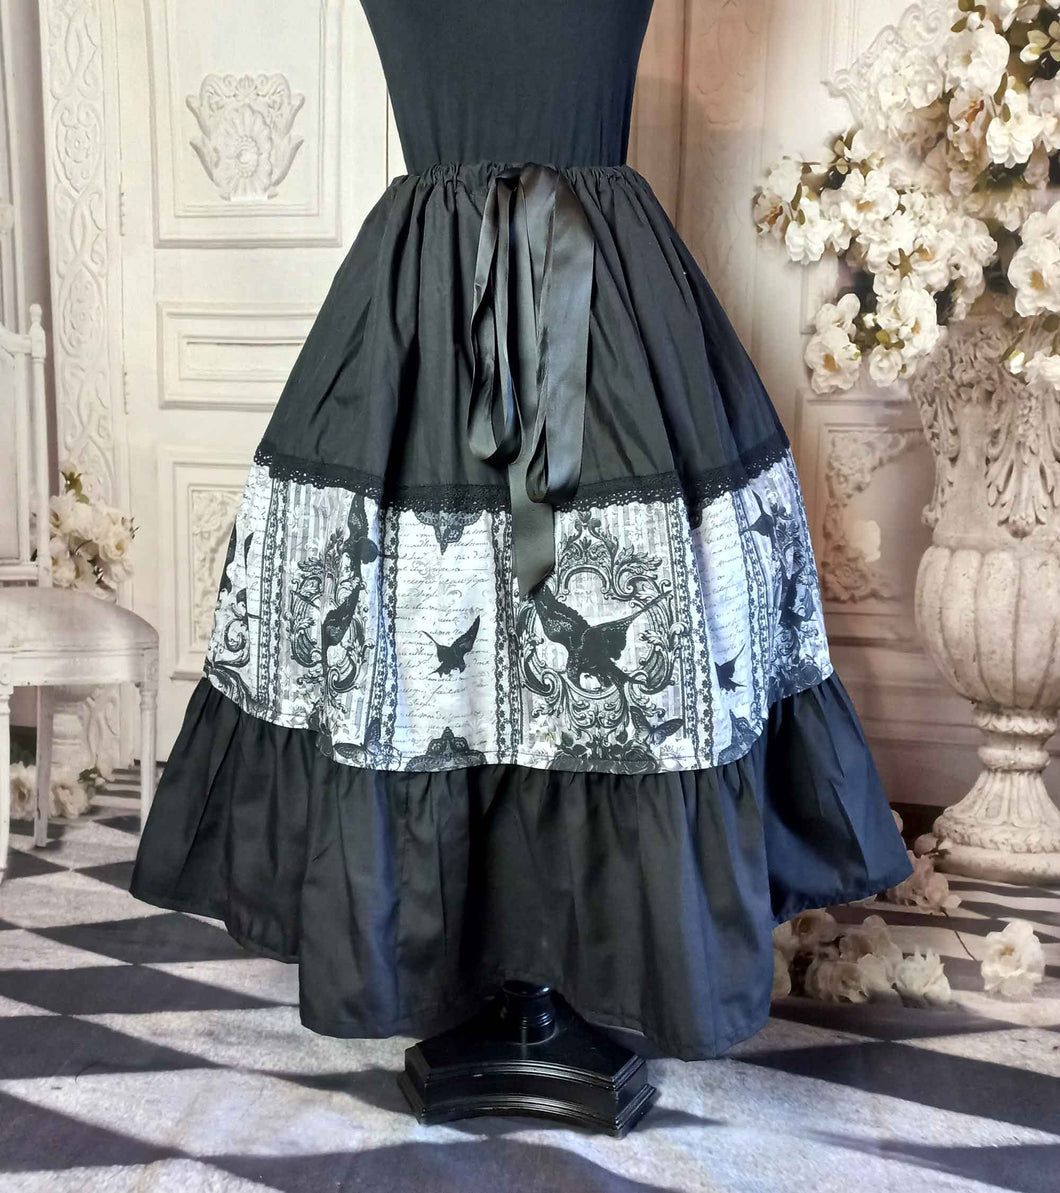 Gothic Raven Full Mid calf length skirt in black and grey.  Adjustable waist up to 50 inches, suitable for plus sizes.  Party Skirt, Full 50's style skirt